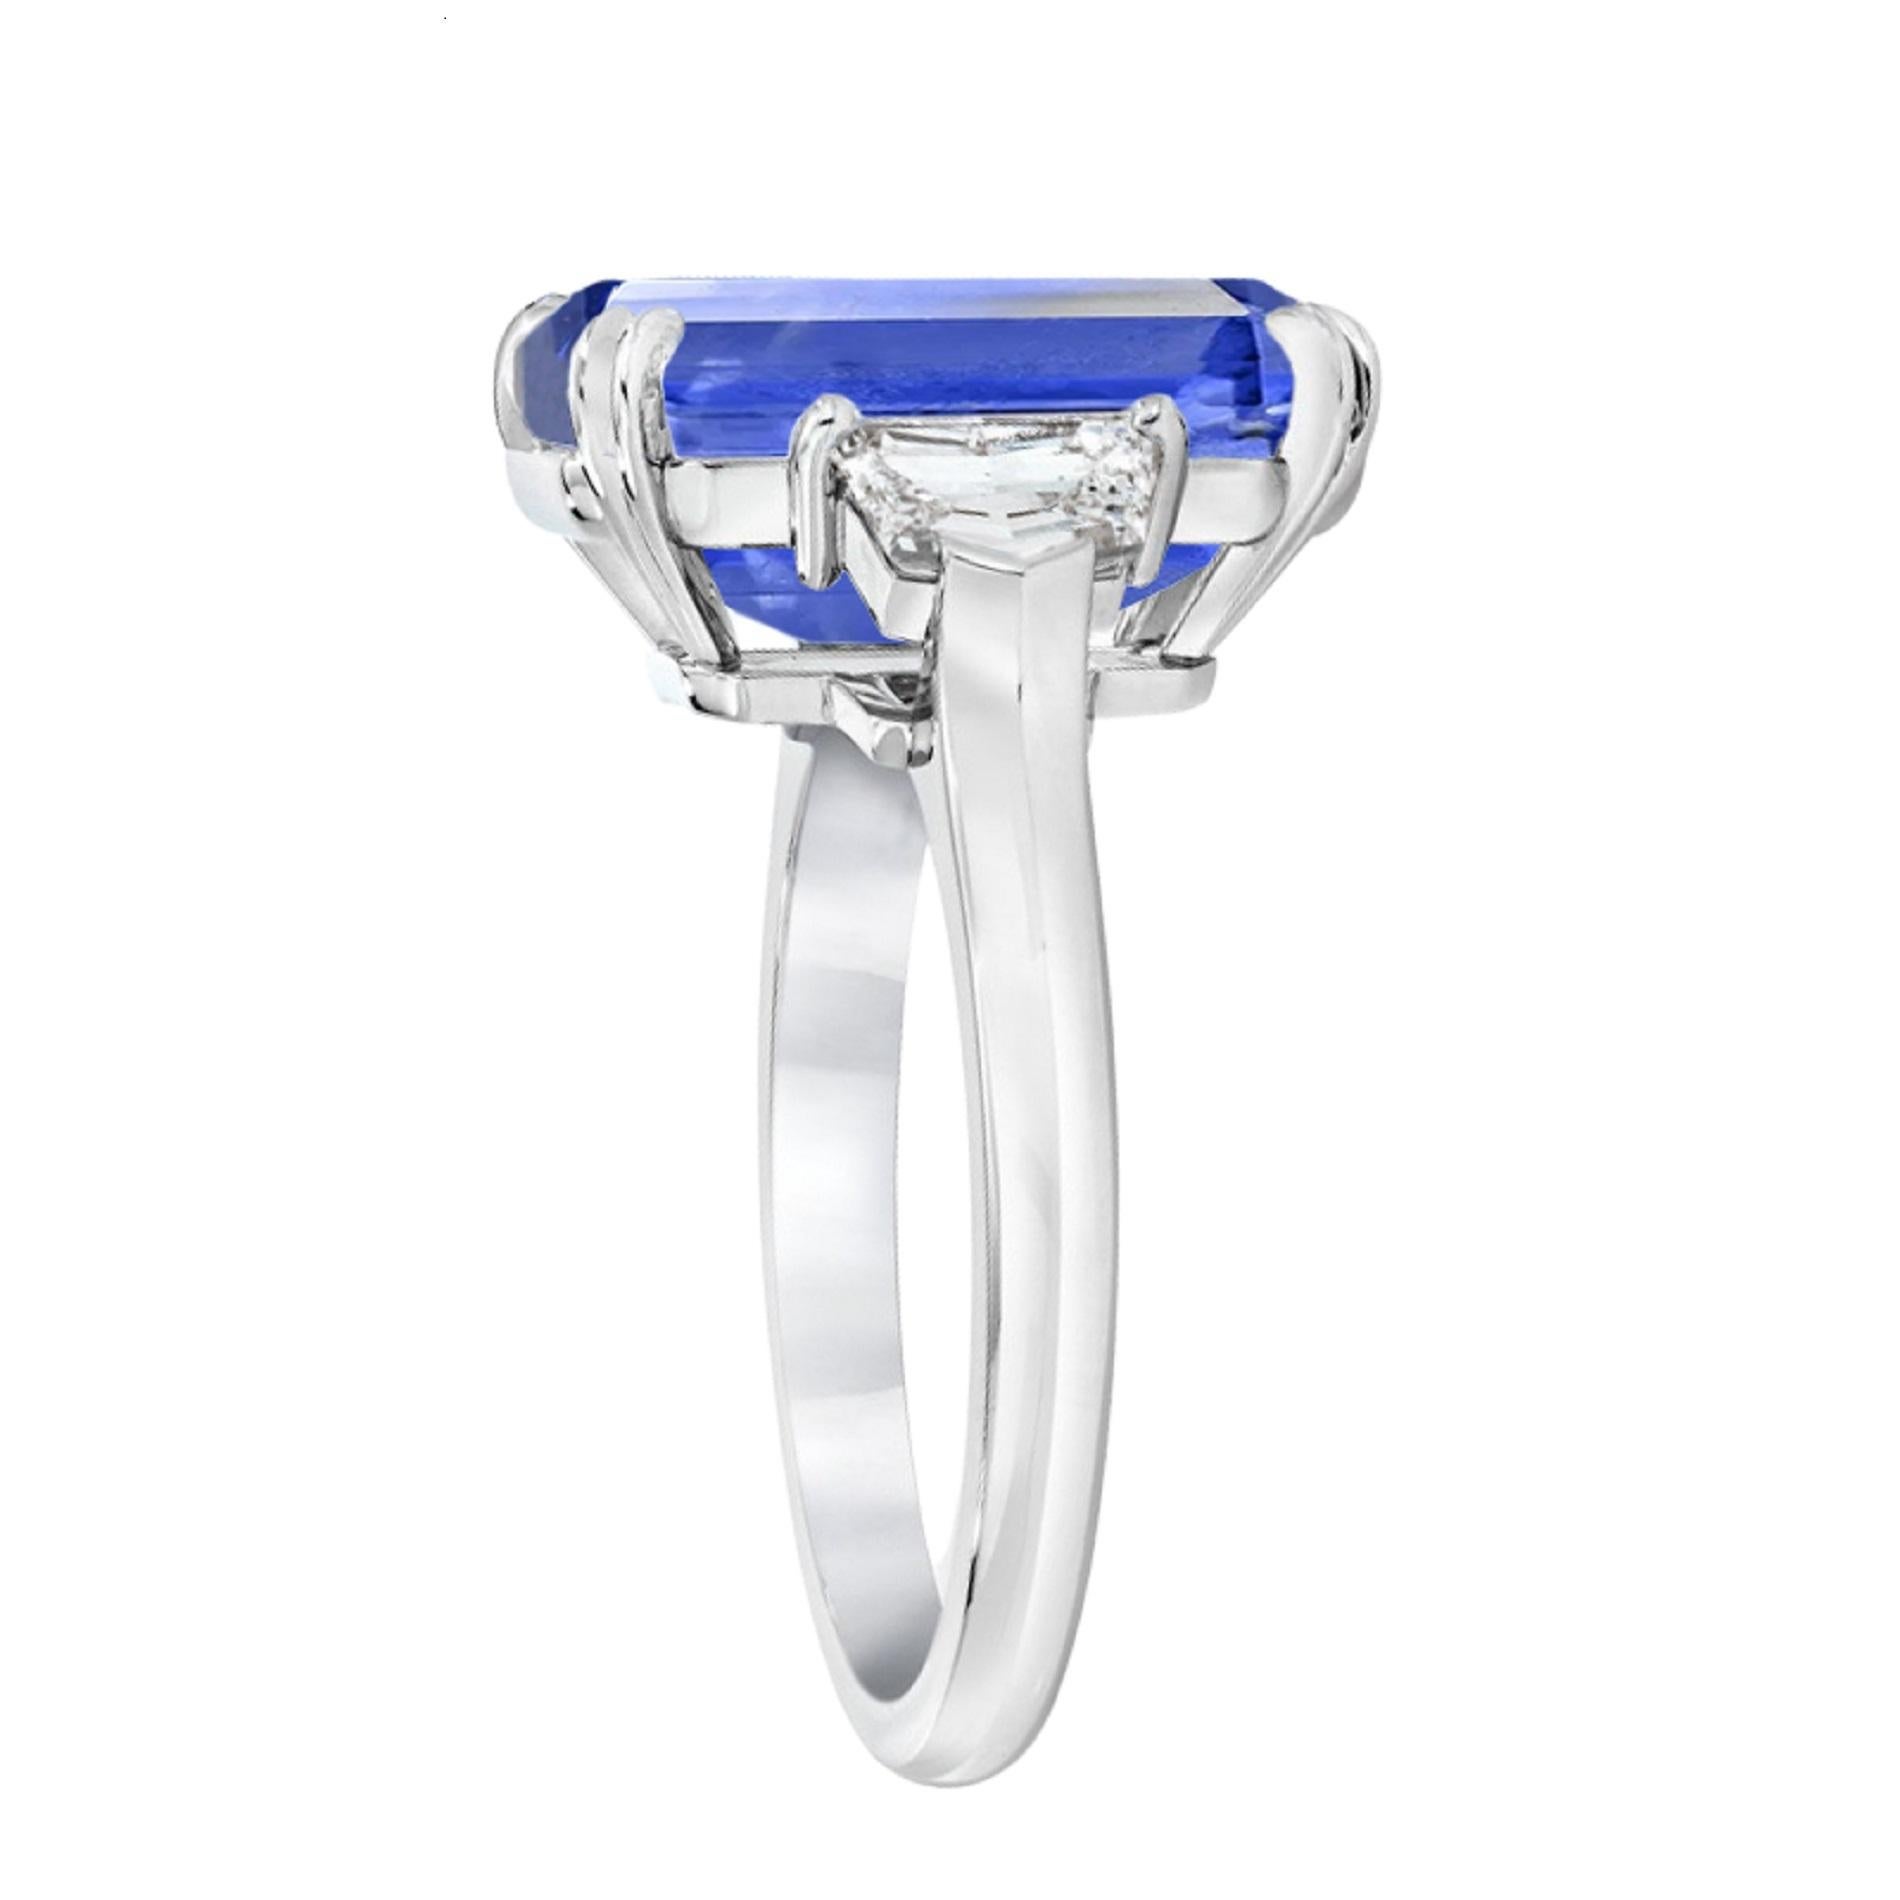 Antinori di Sanpietro Roma created this ring and is an excellent investment! Showcasing an Emerald Cut Ceylon Sapphire weighing 9.12 carats, and certified by GRS Switzerland as an untreated, UNHEATED Sri Lankan Ceylon Sapphire. 

You will notice